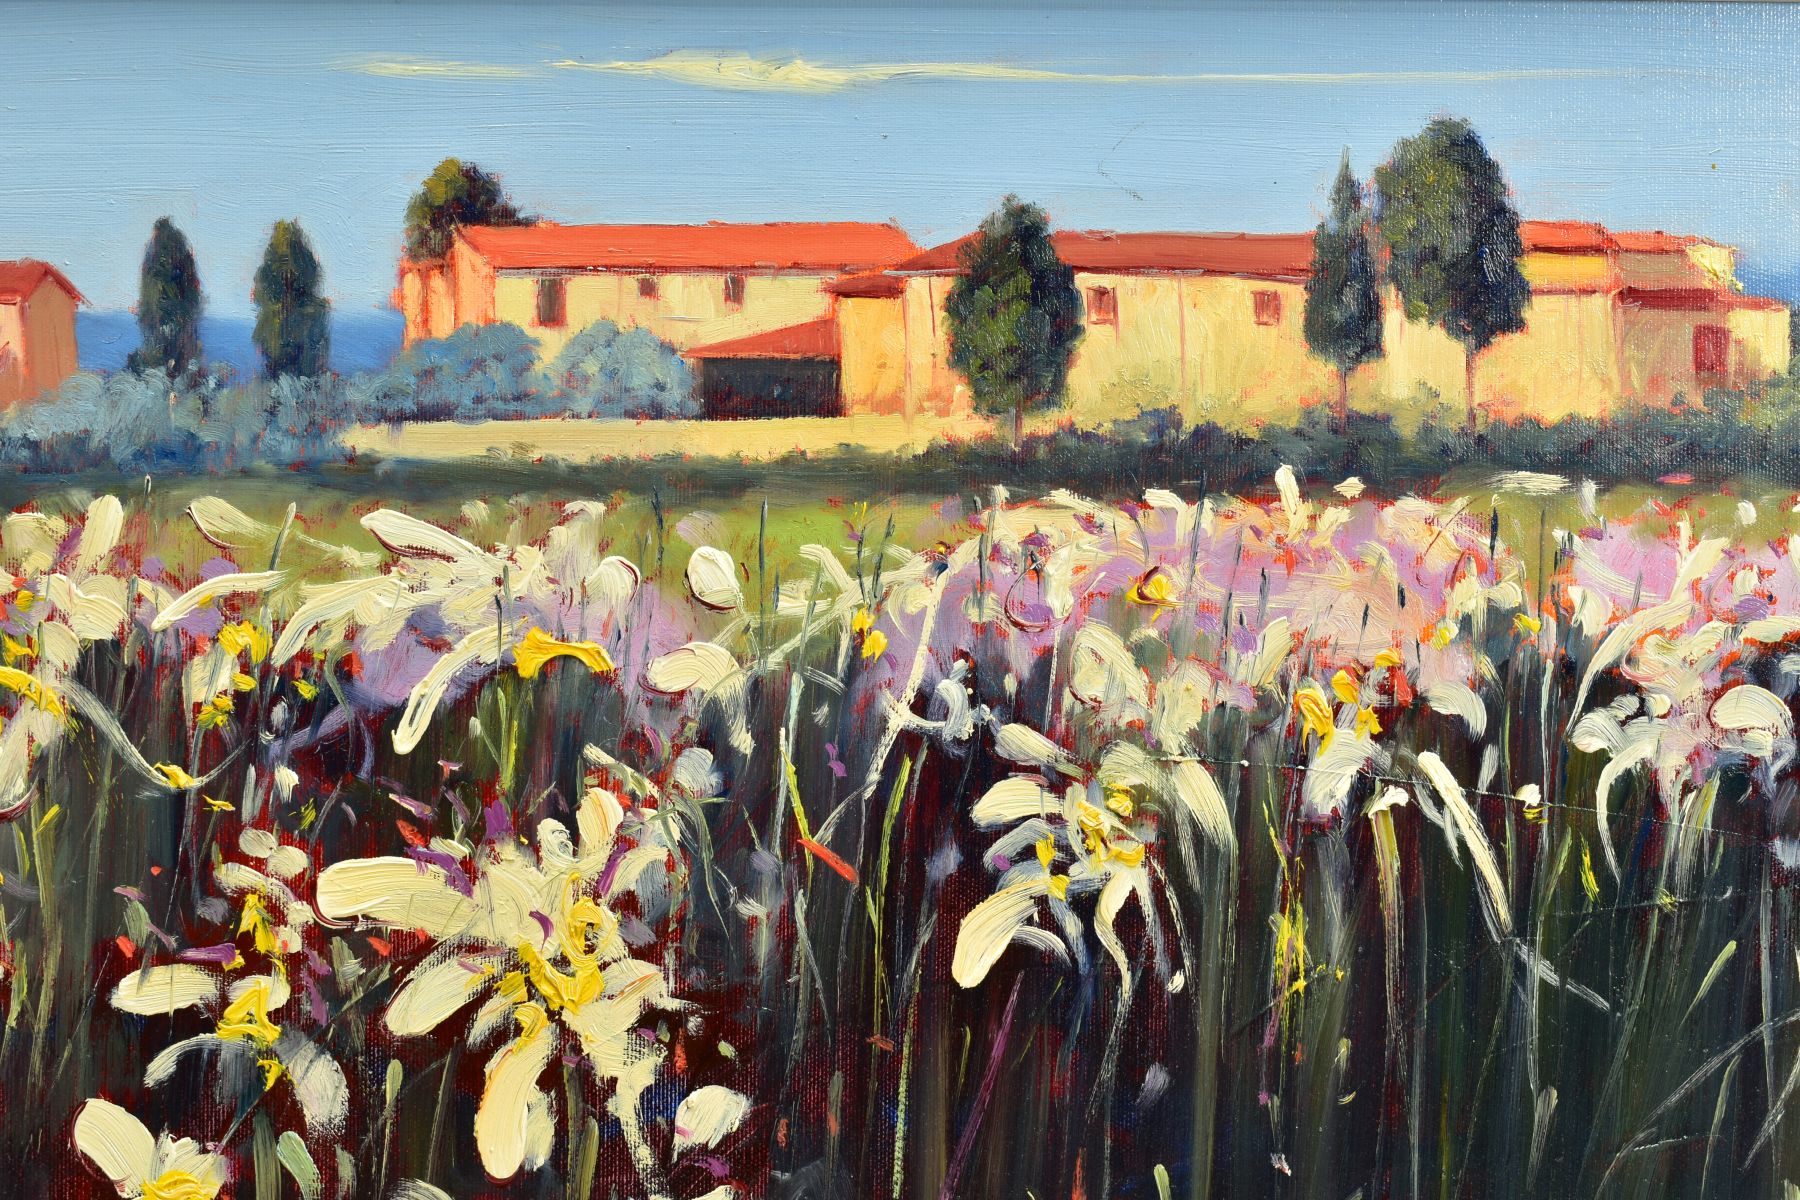 BRUNO TINUCCI (ITALY 19470) 'CAMPO BIANCO', an Italian landscape of flowers with buildings beyond, - Image 3 of 8